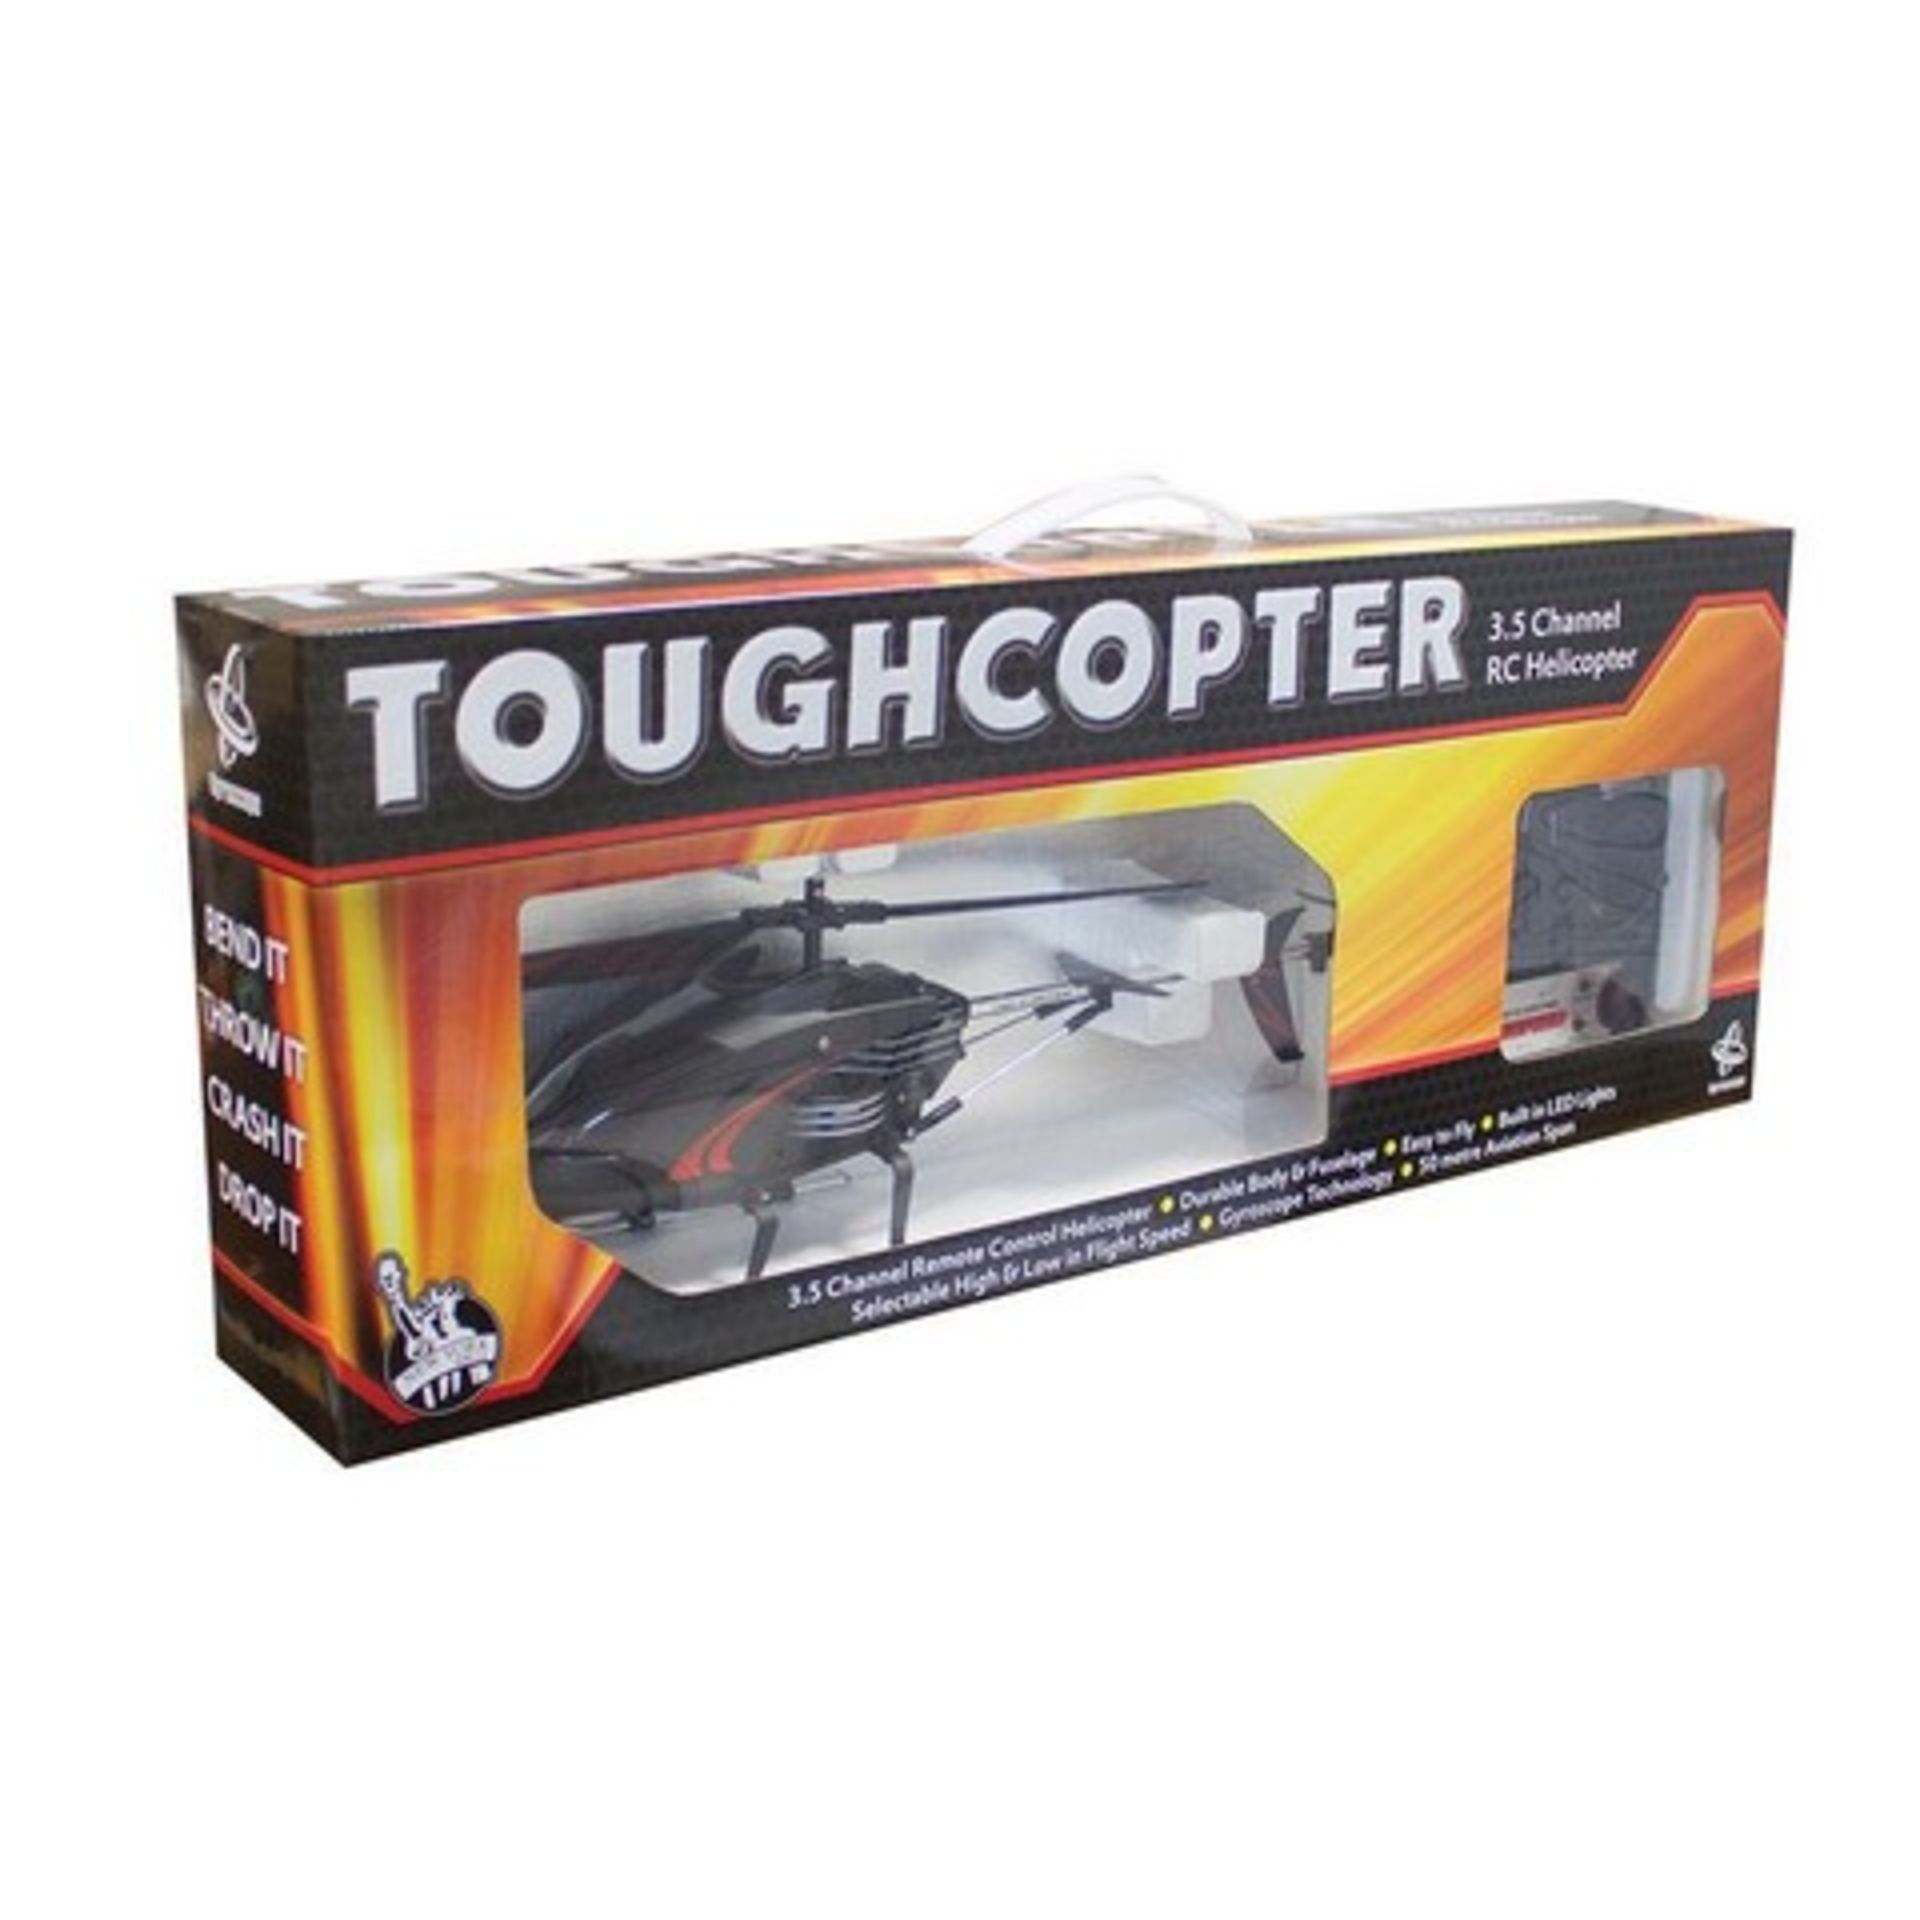 + VAT Brand New Toughcopter 3.5 Channel R/C Helicopter With 3.0 Channel - Durable Body & Fuselage - - Image 2 of 2